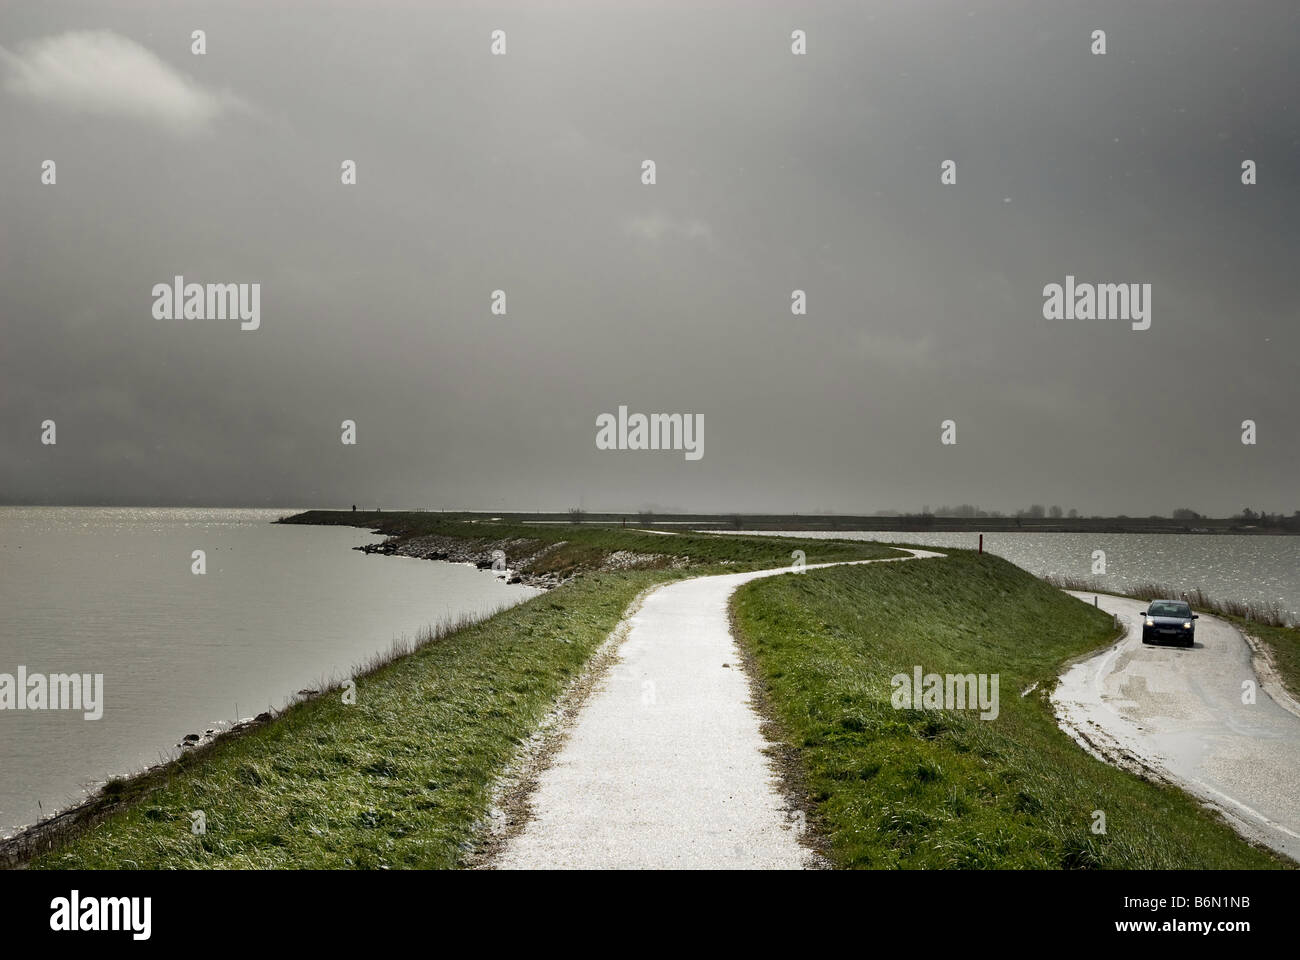 landscape scene in the netherlands with bad weather Stock Photo